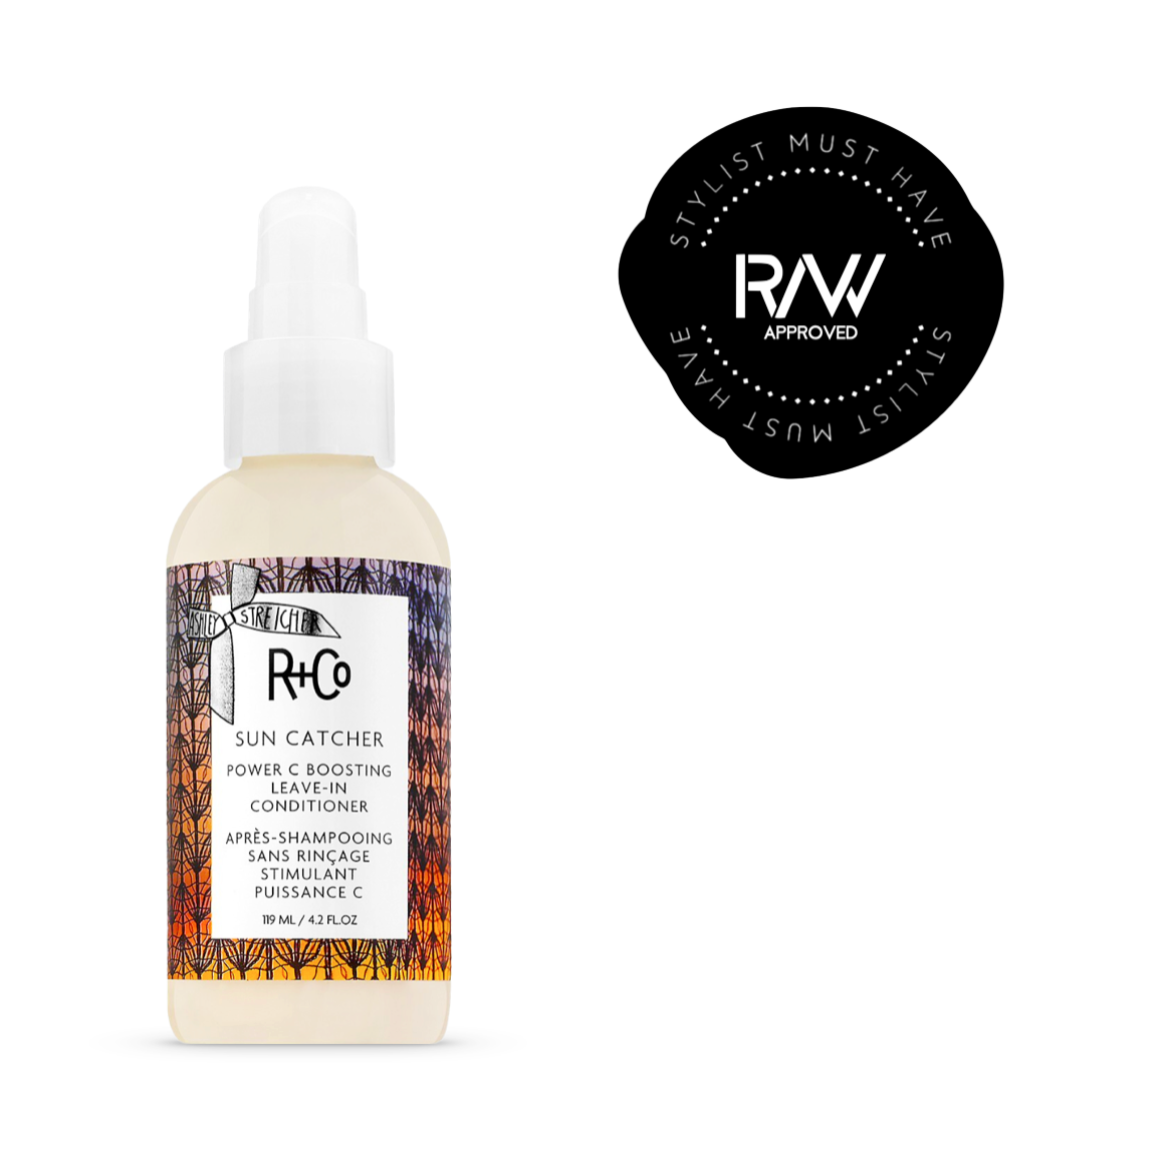 A semi-clear bottle with a white spray pump, labeled R+Co Sun Catcher Power C Boosting Leave-In Conditioner. The label features a mosaic pattern in warm tones suggesting the nurturing power of the sun. Contains 119ml/4.2fl.oz for revitalizing hair care.